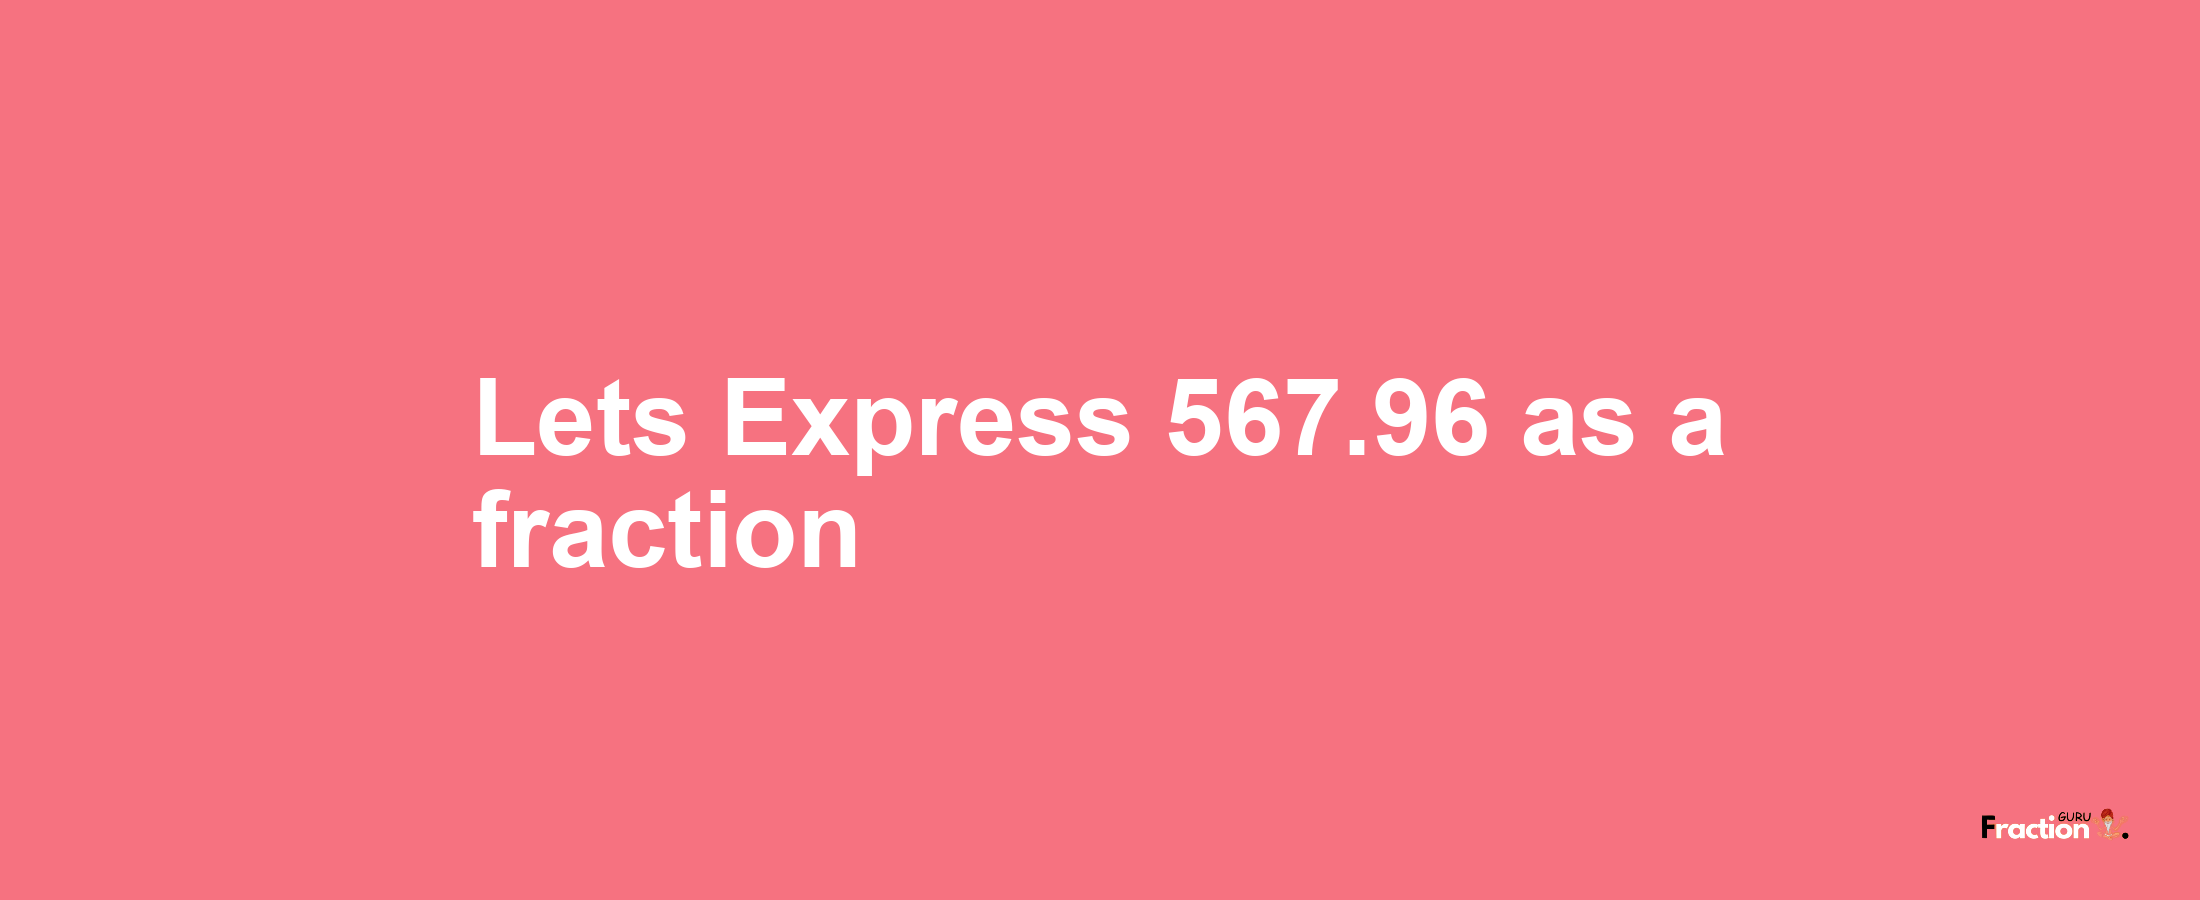 Lets Express 567.96 as afraction